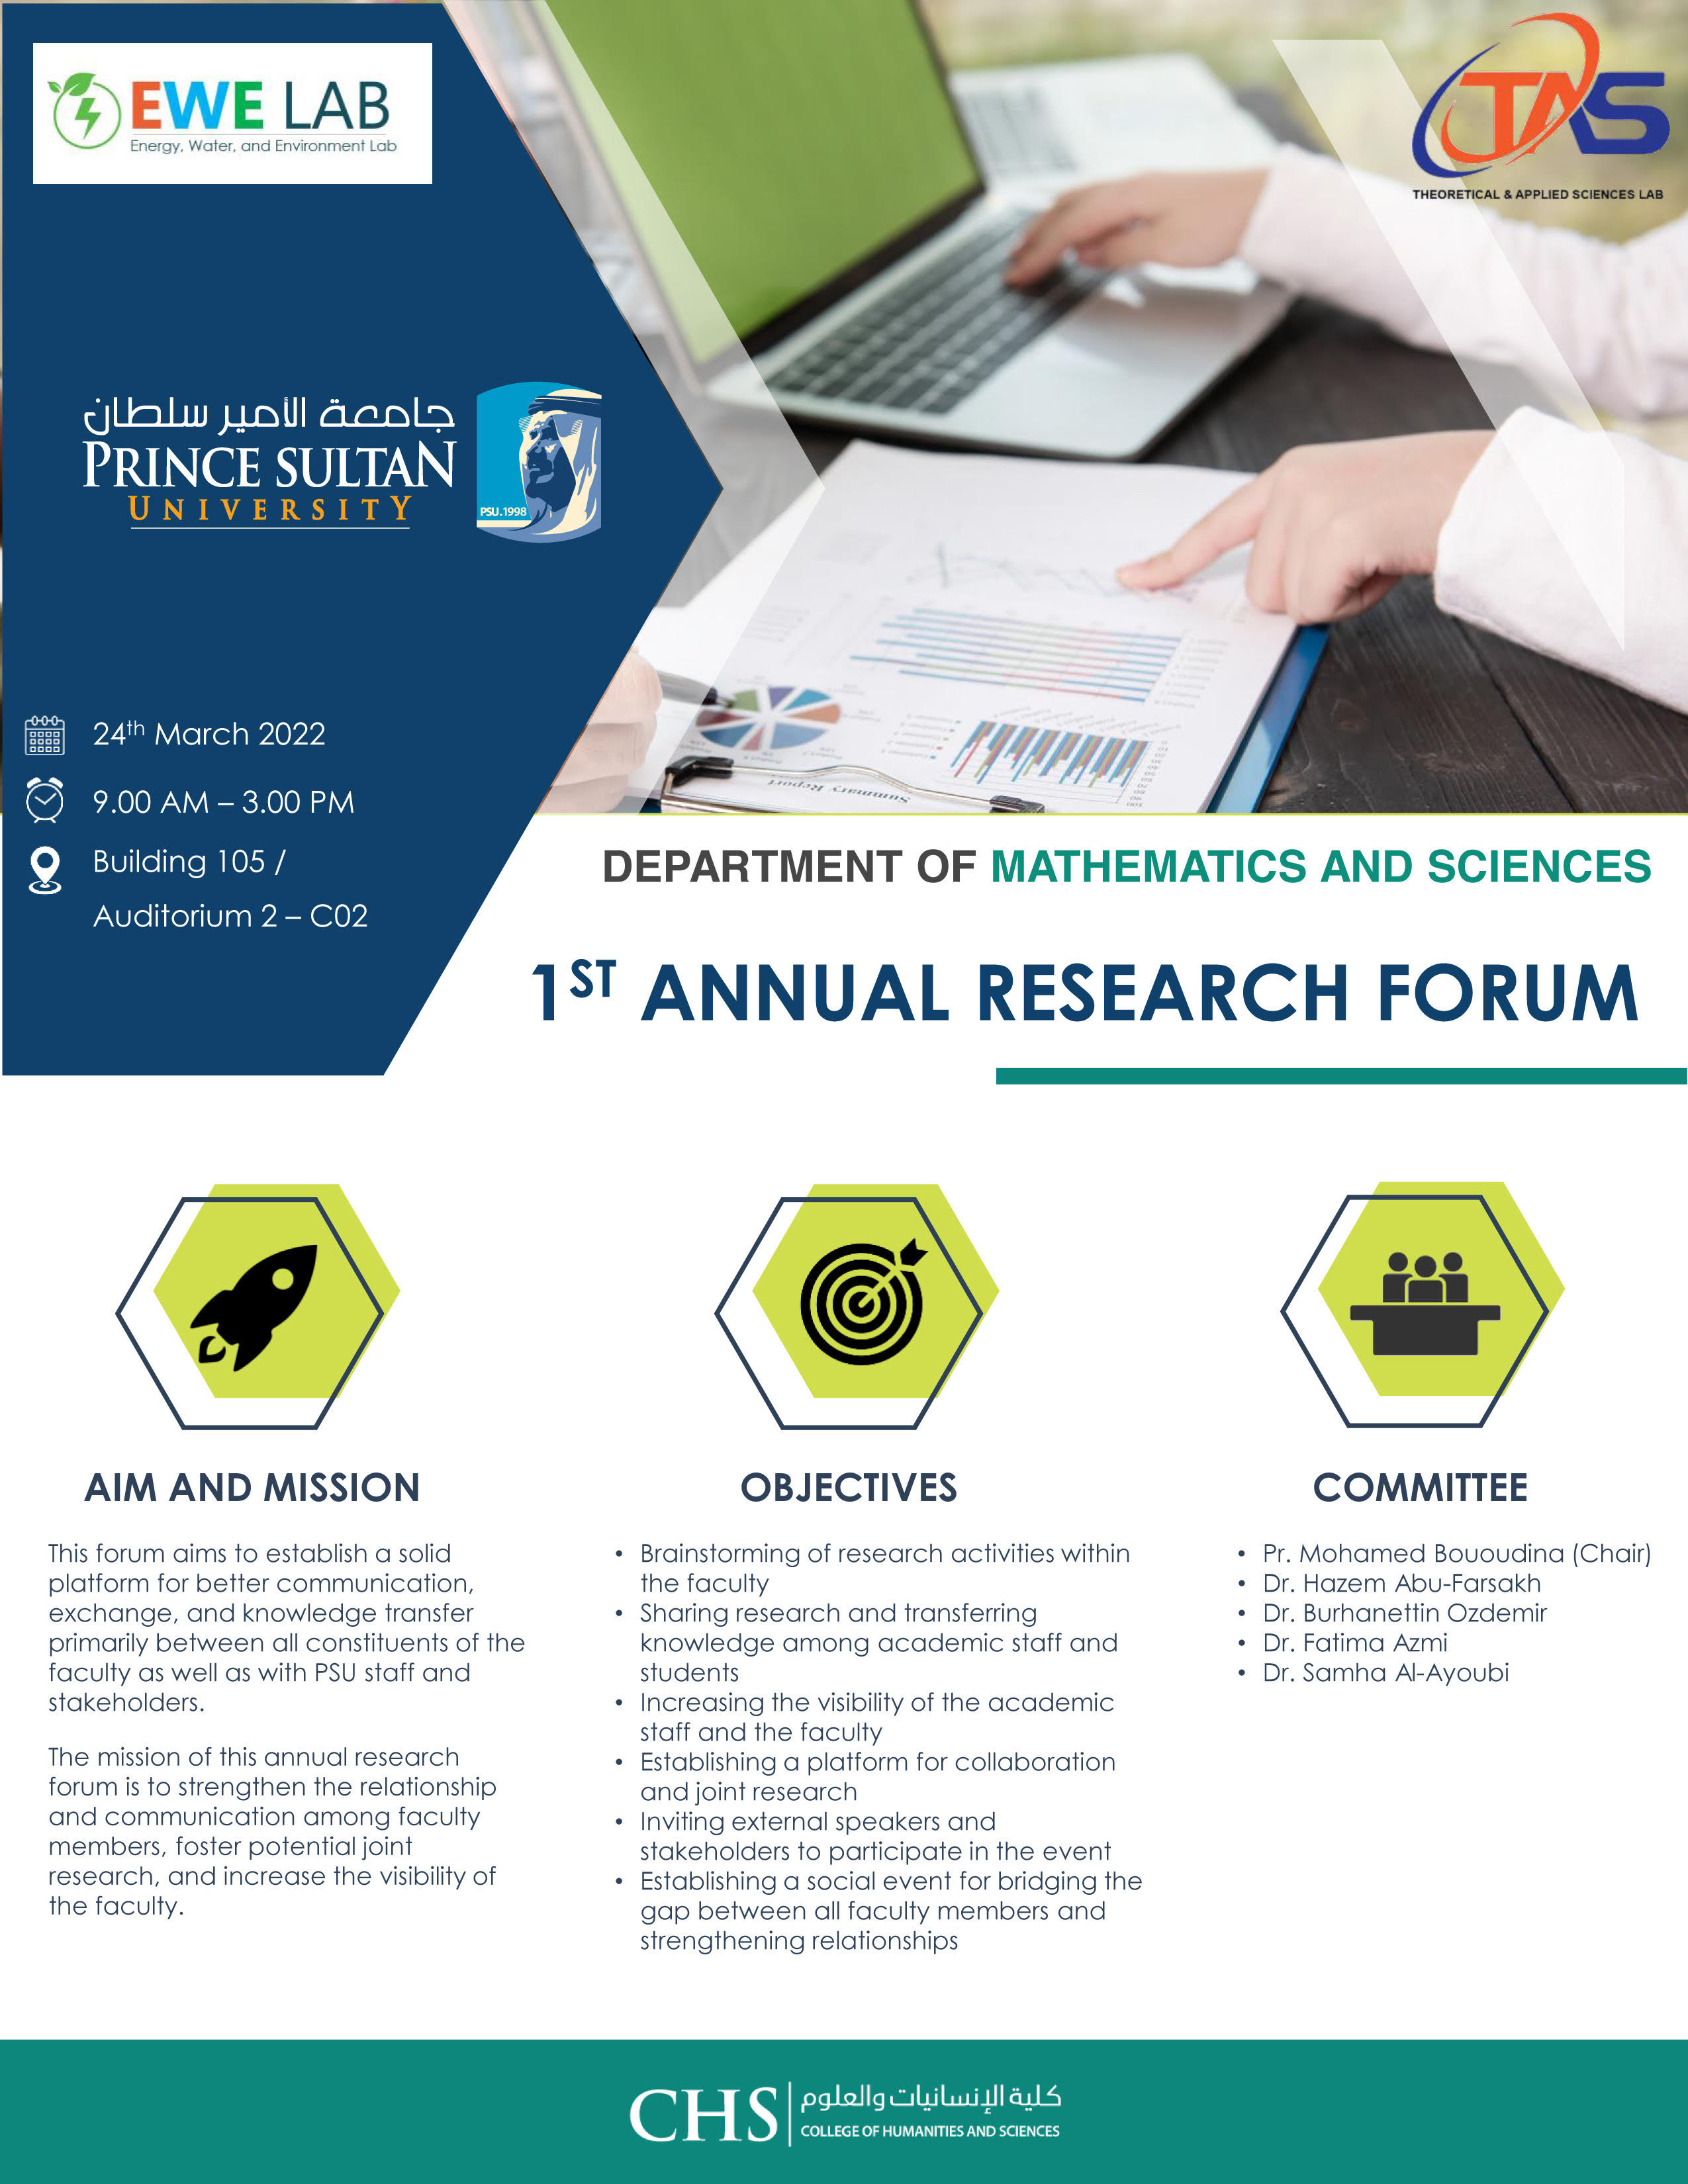 Ist Annual Research Forum